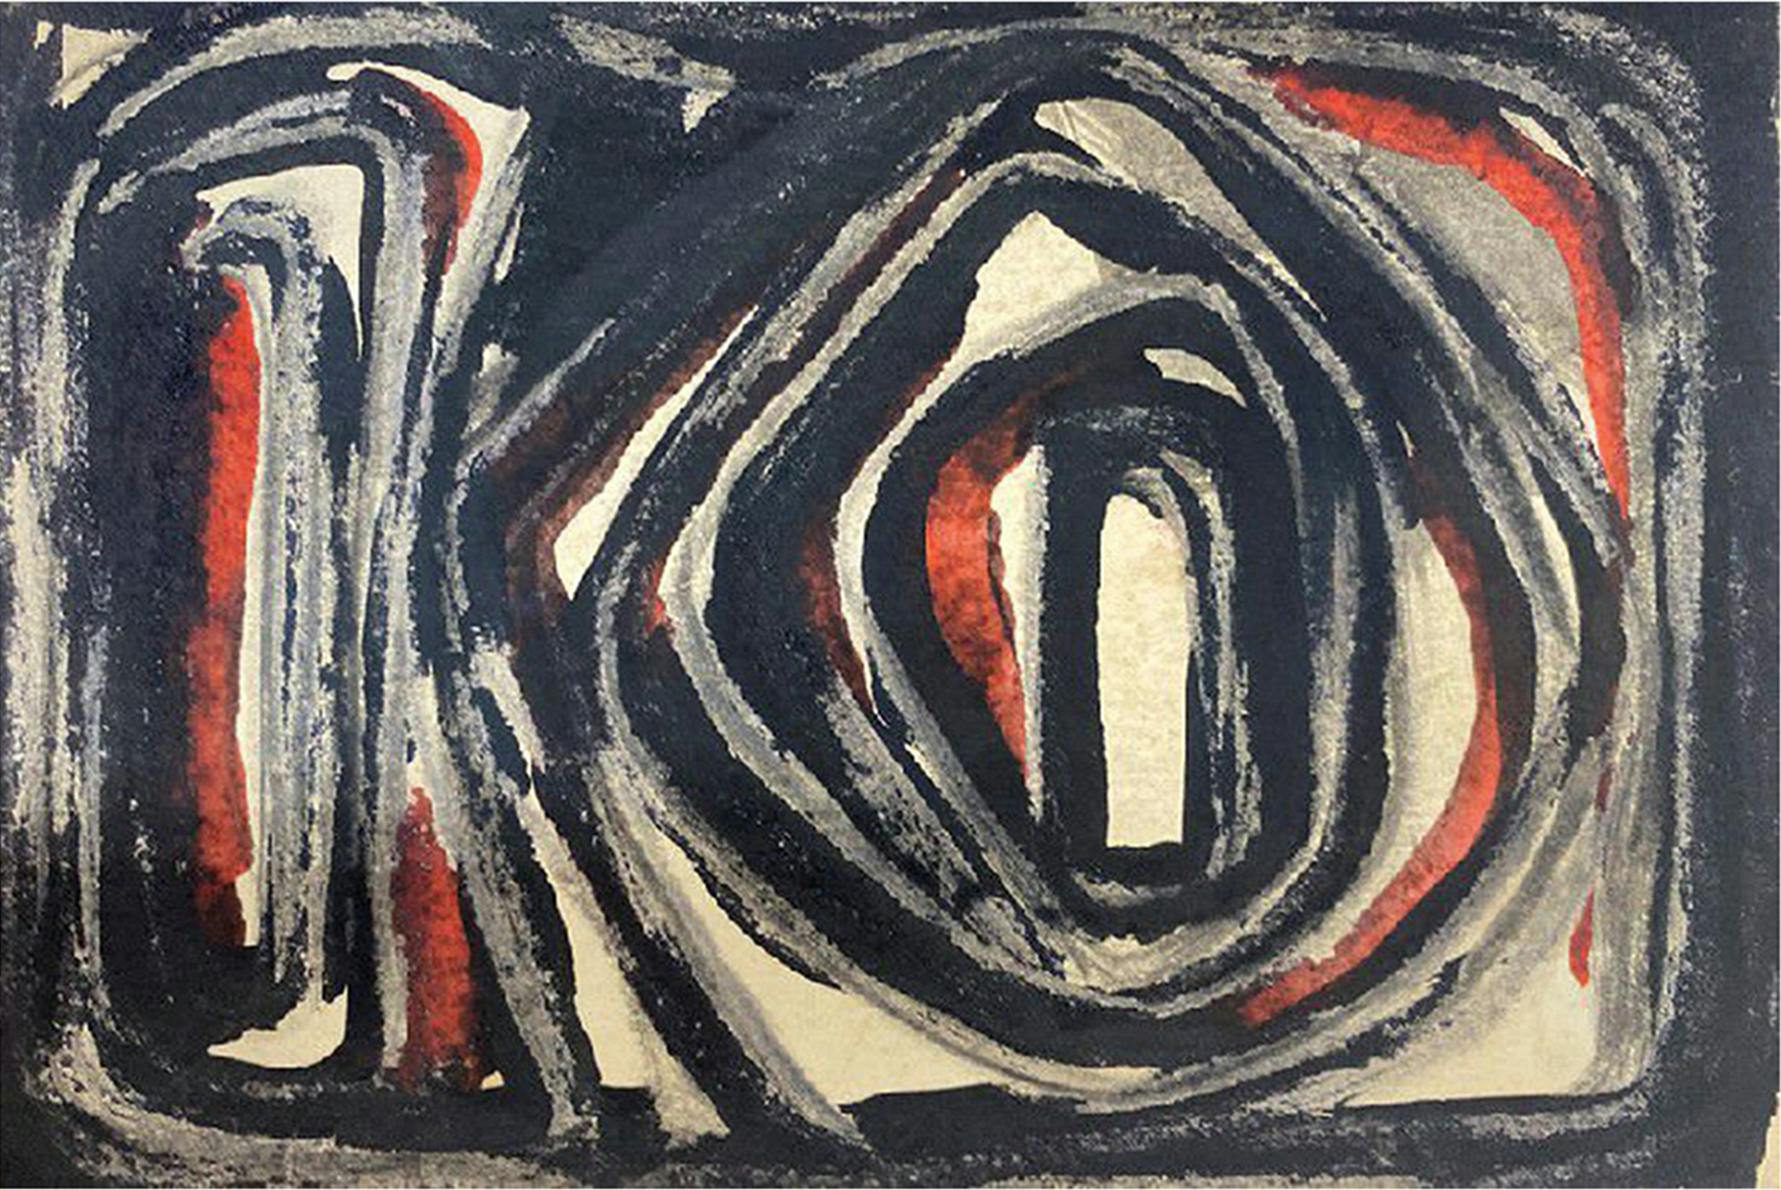 An abstract painting of a rectangle and a spiral-like figure in red, white, and black.